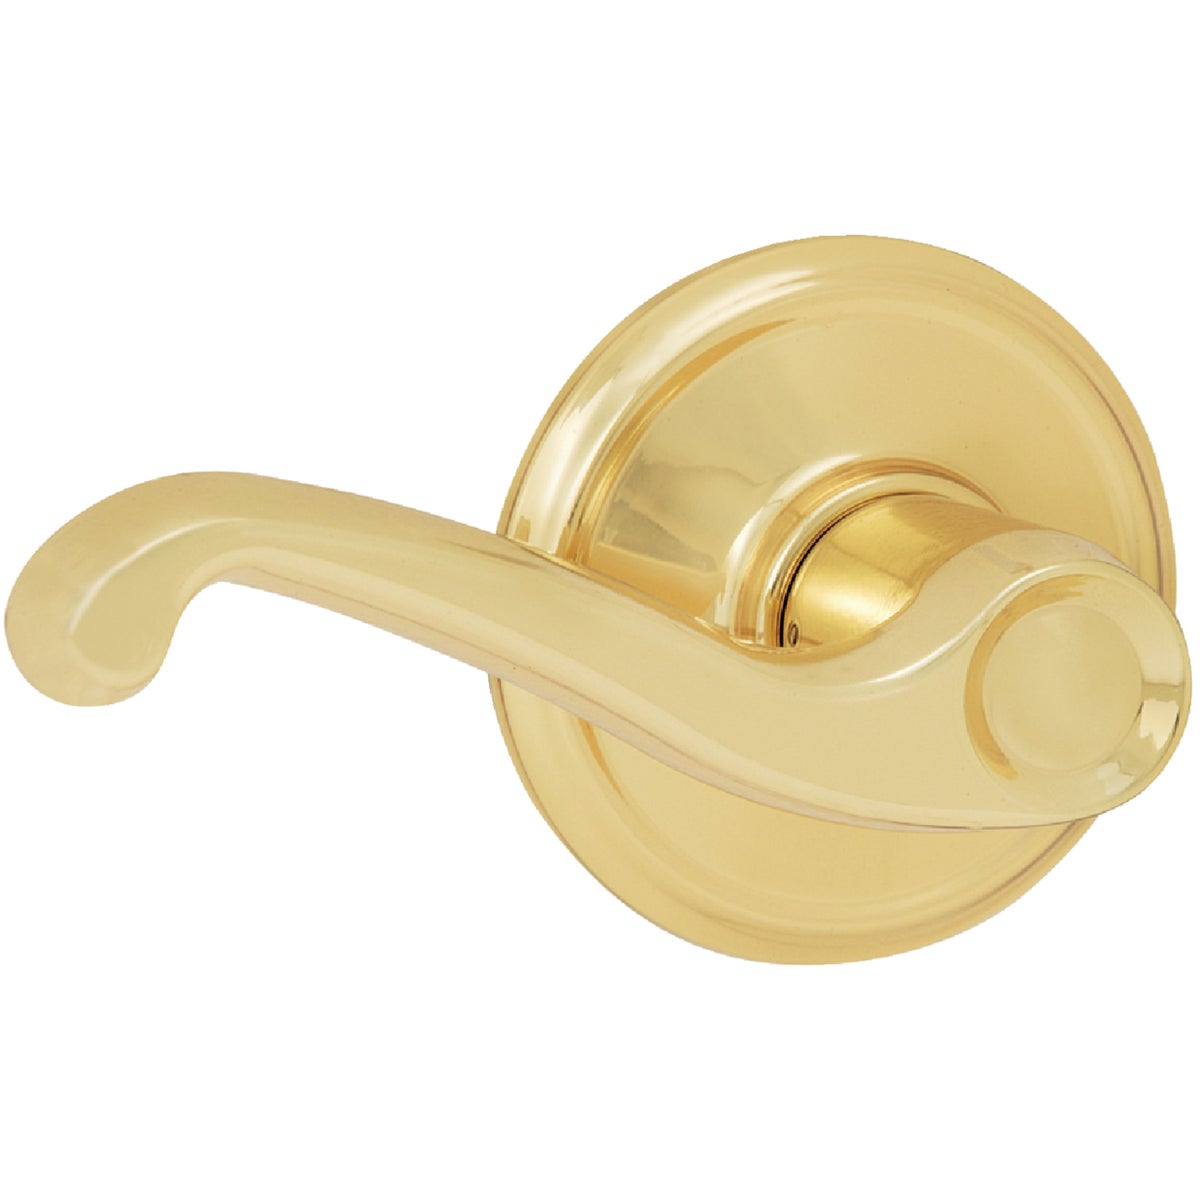 Item 217526, Ideal for hall closet/closets and rooms where locking is not needed.